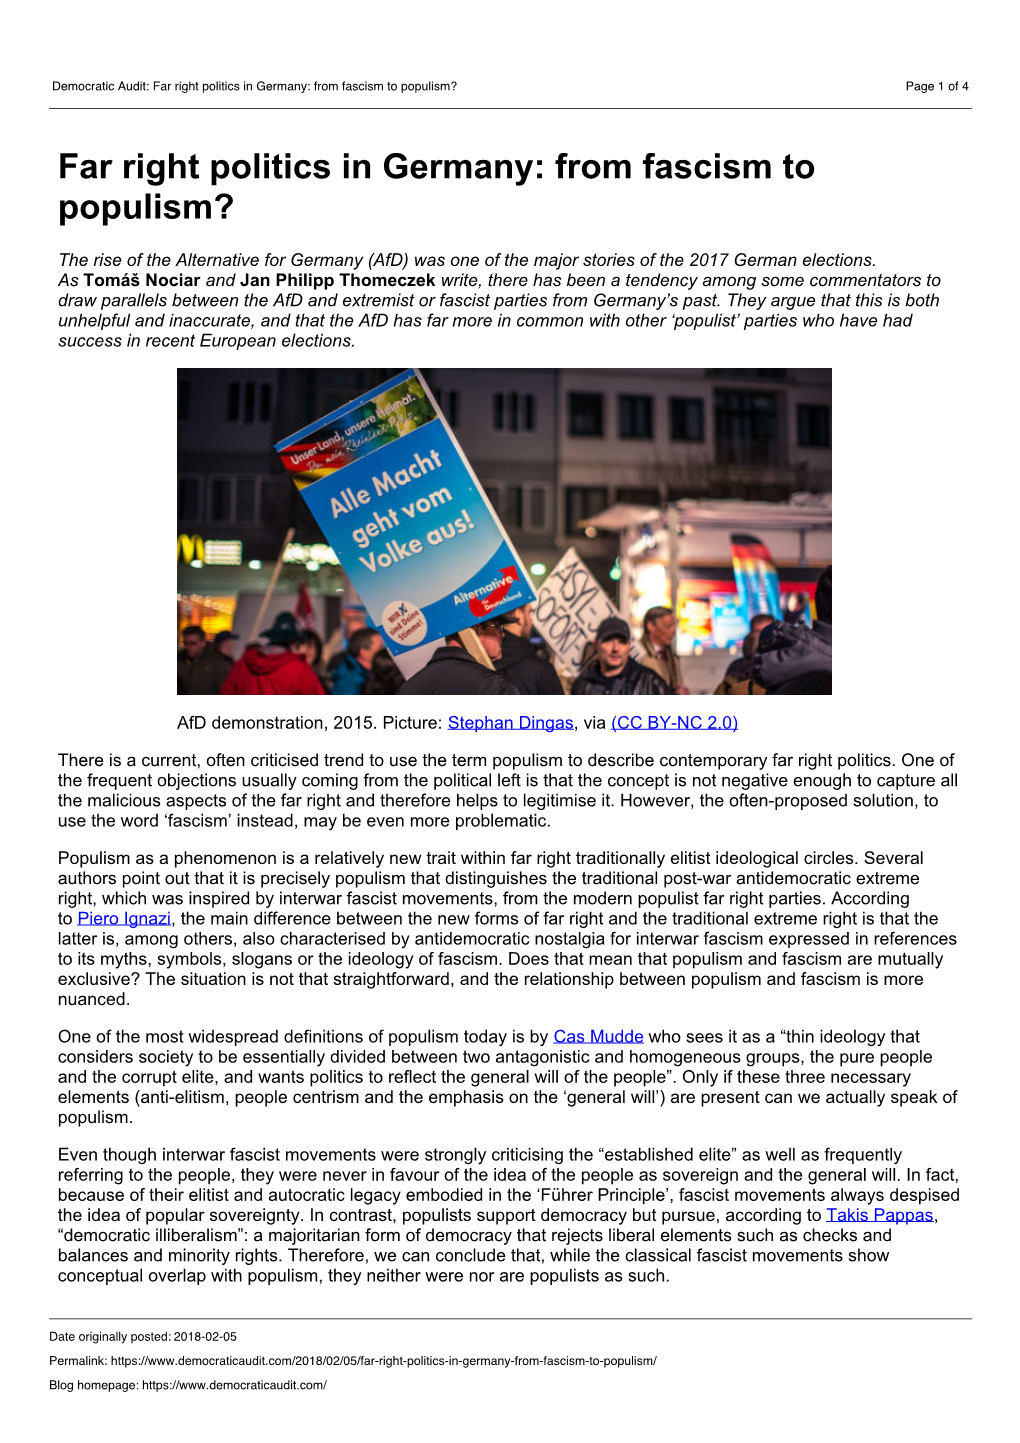 Far Right Politics in Germany: from Fascism to Populism? Page 1 of 4